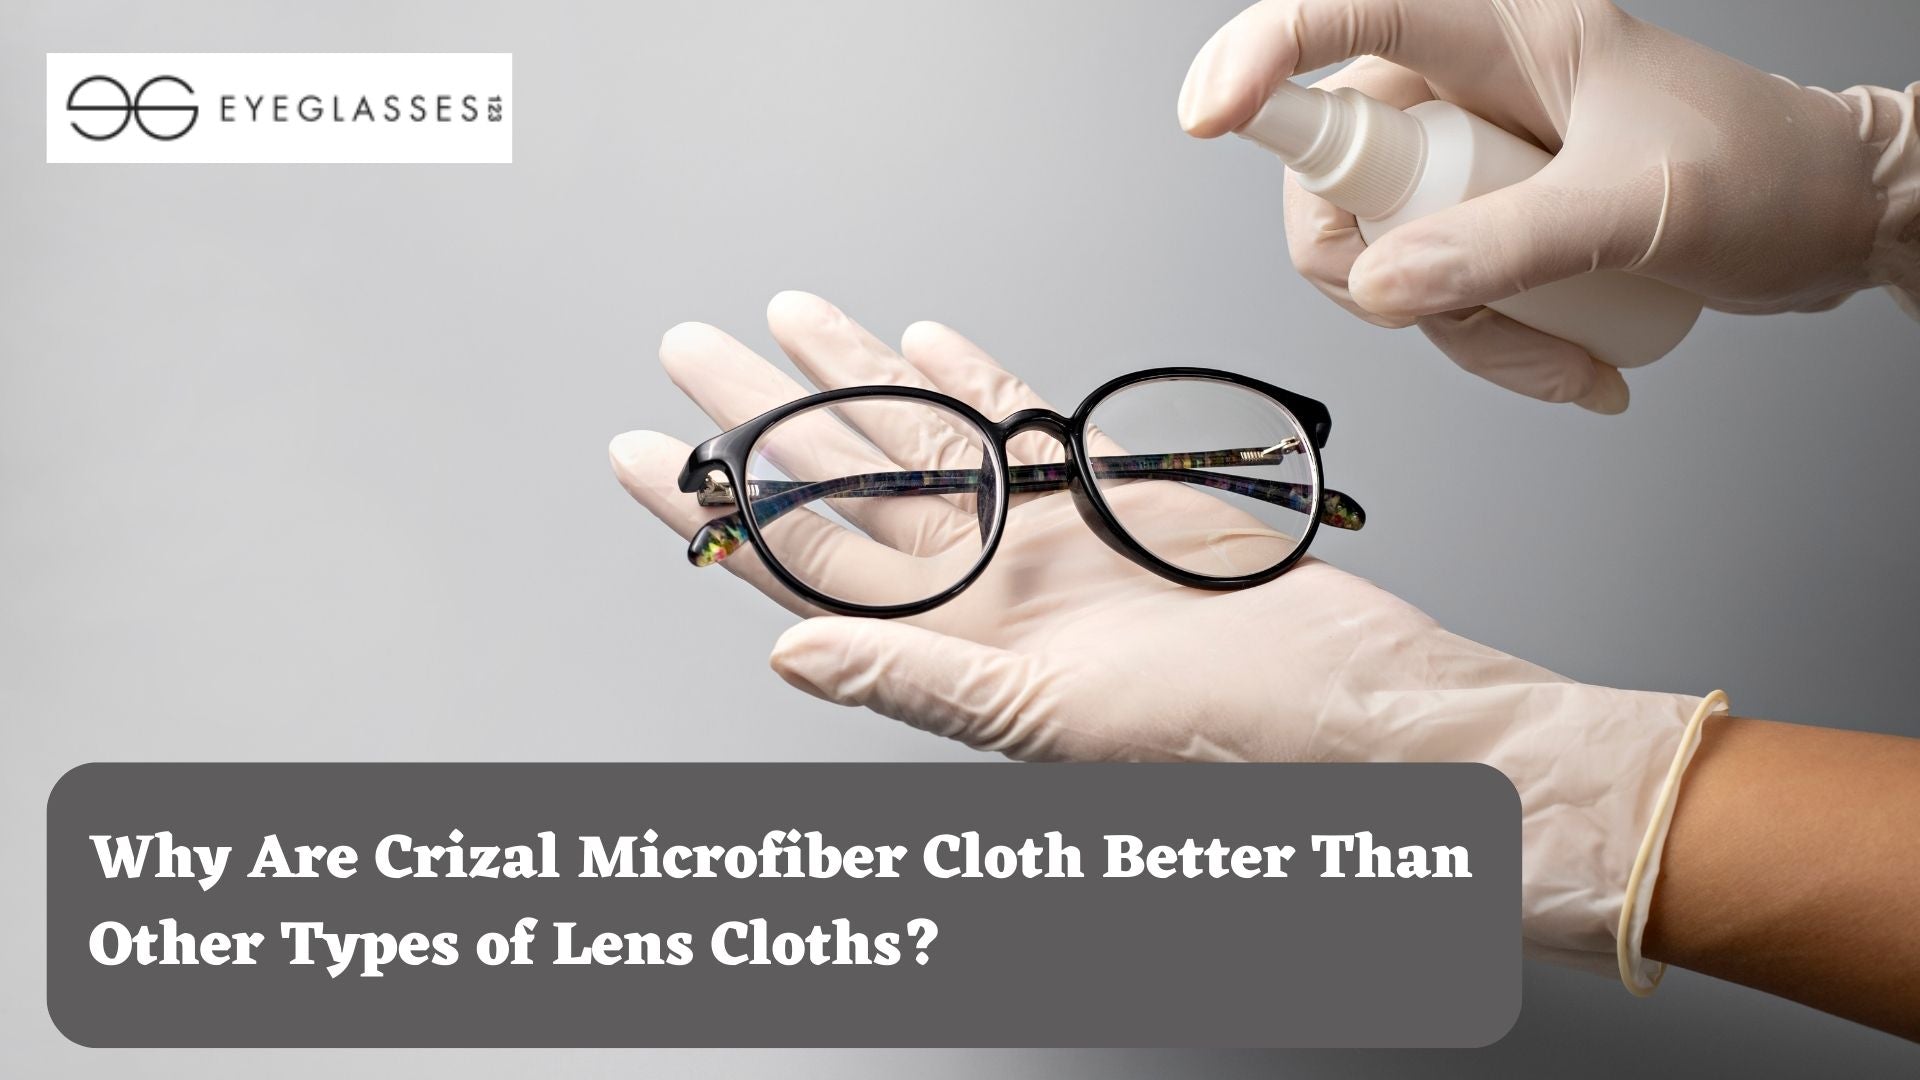 Why Are Crizal Microfiber Cloth Better Than Other Types of Lens Cloths?